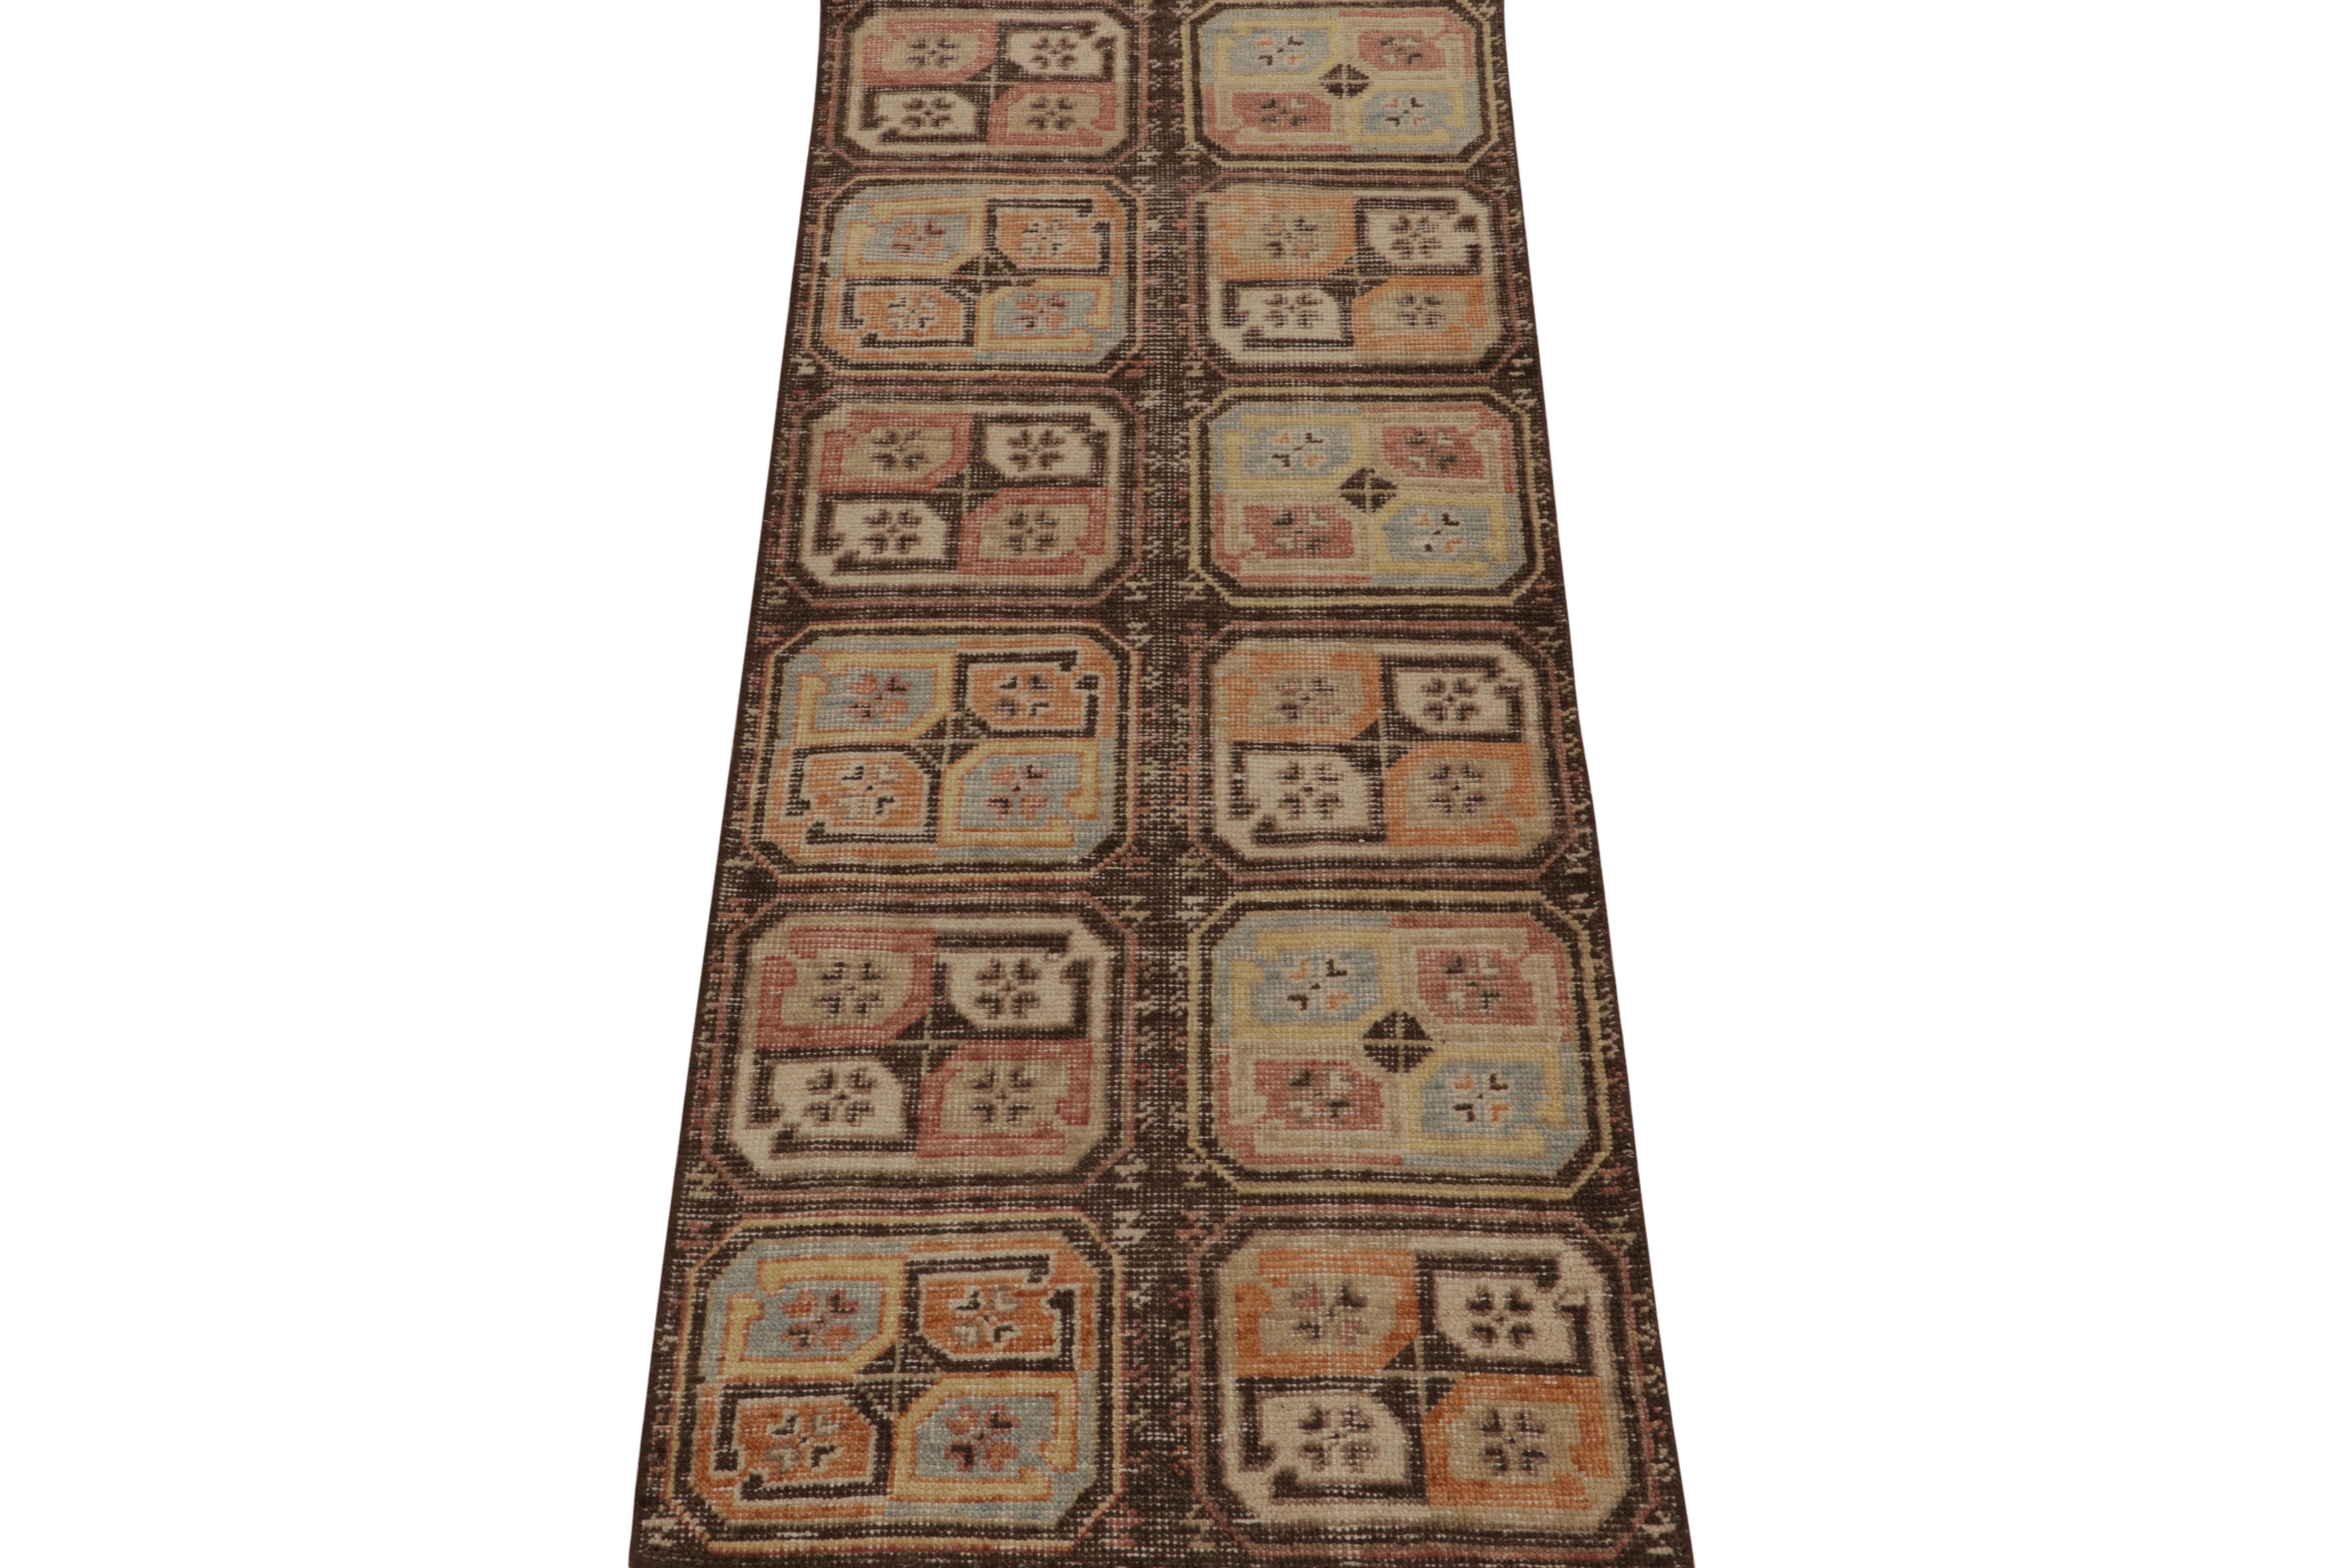 Indian Rug & Kilim’s Distressed Tribal Style Runner in Beige-Brown & Colorful Emblems For Sale